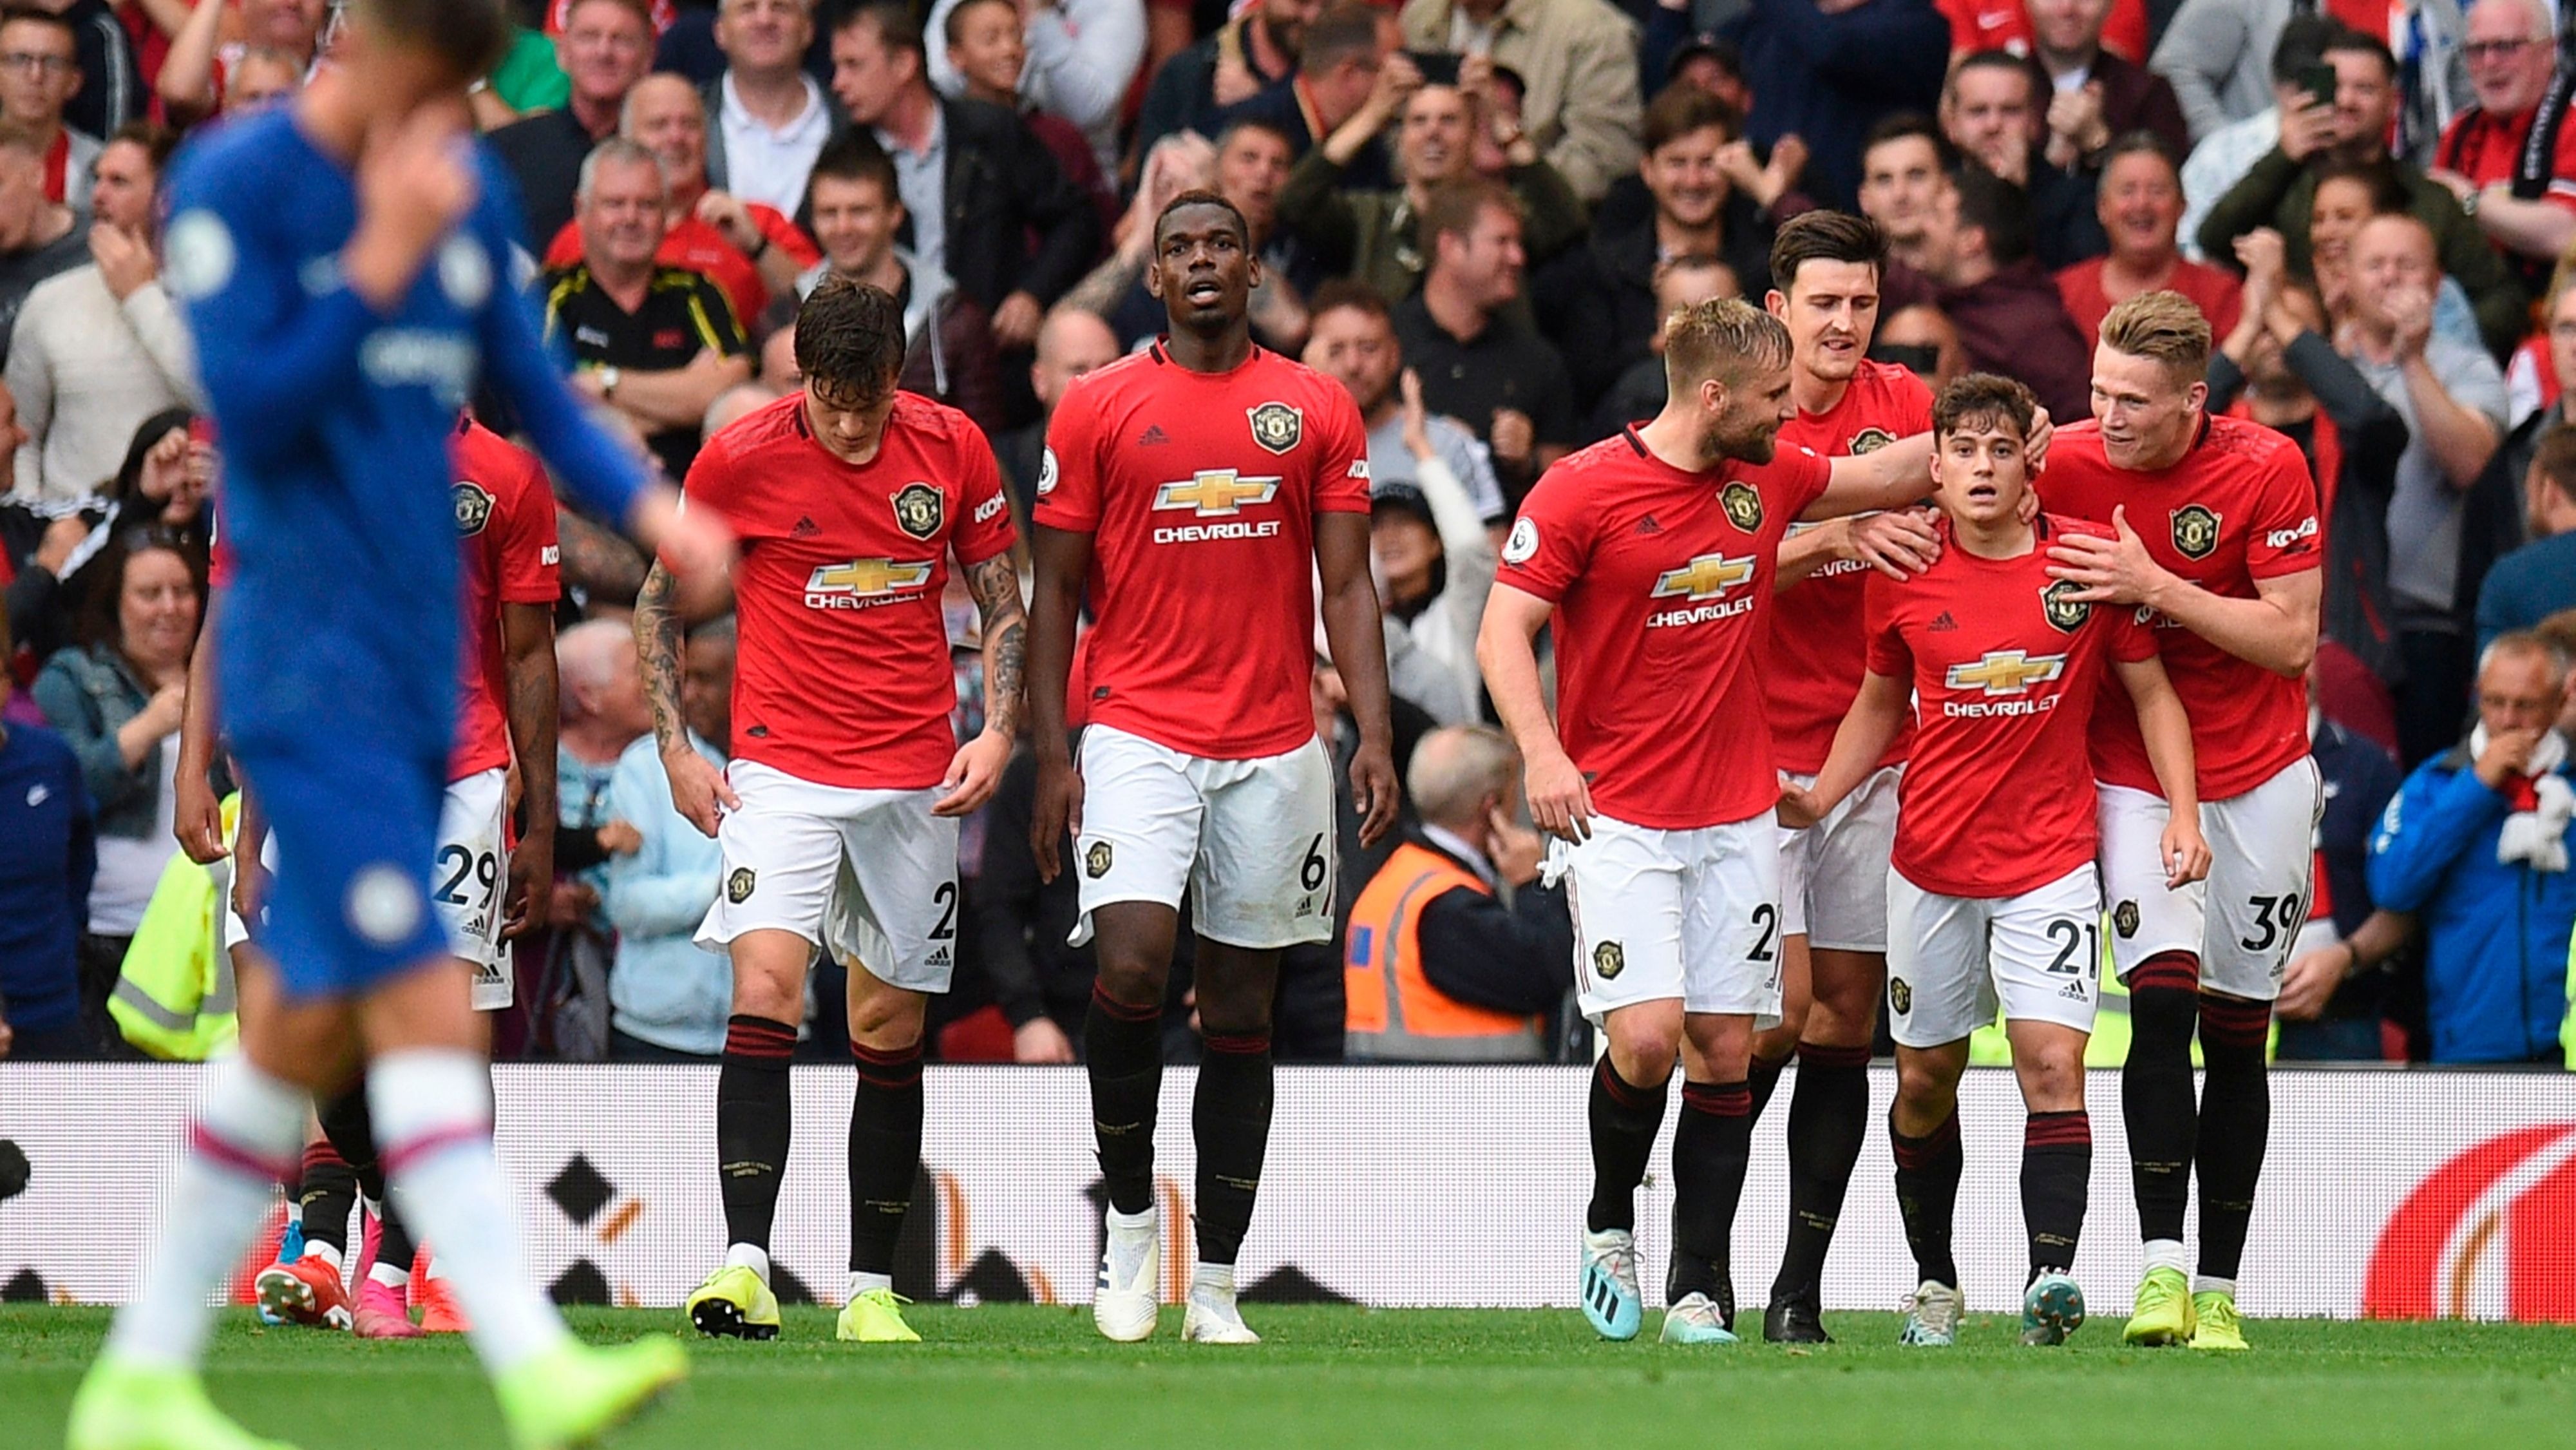 Manchester United scored four against Chelsea on the opening weekend